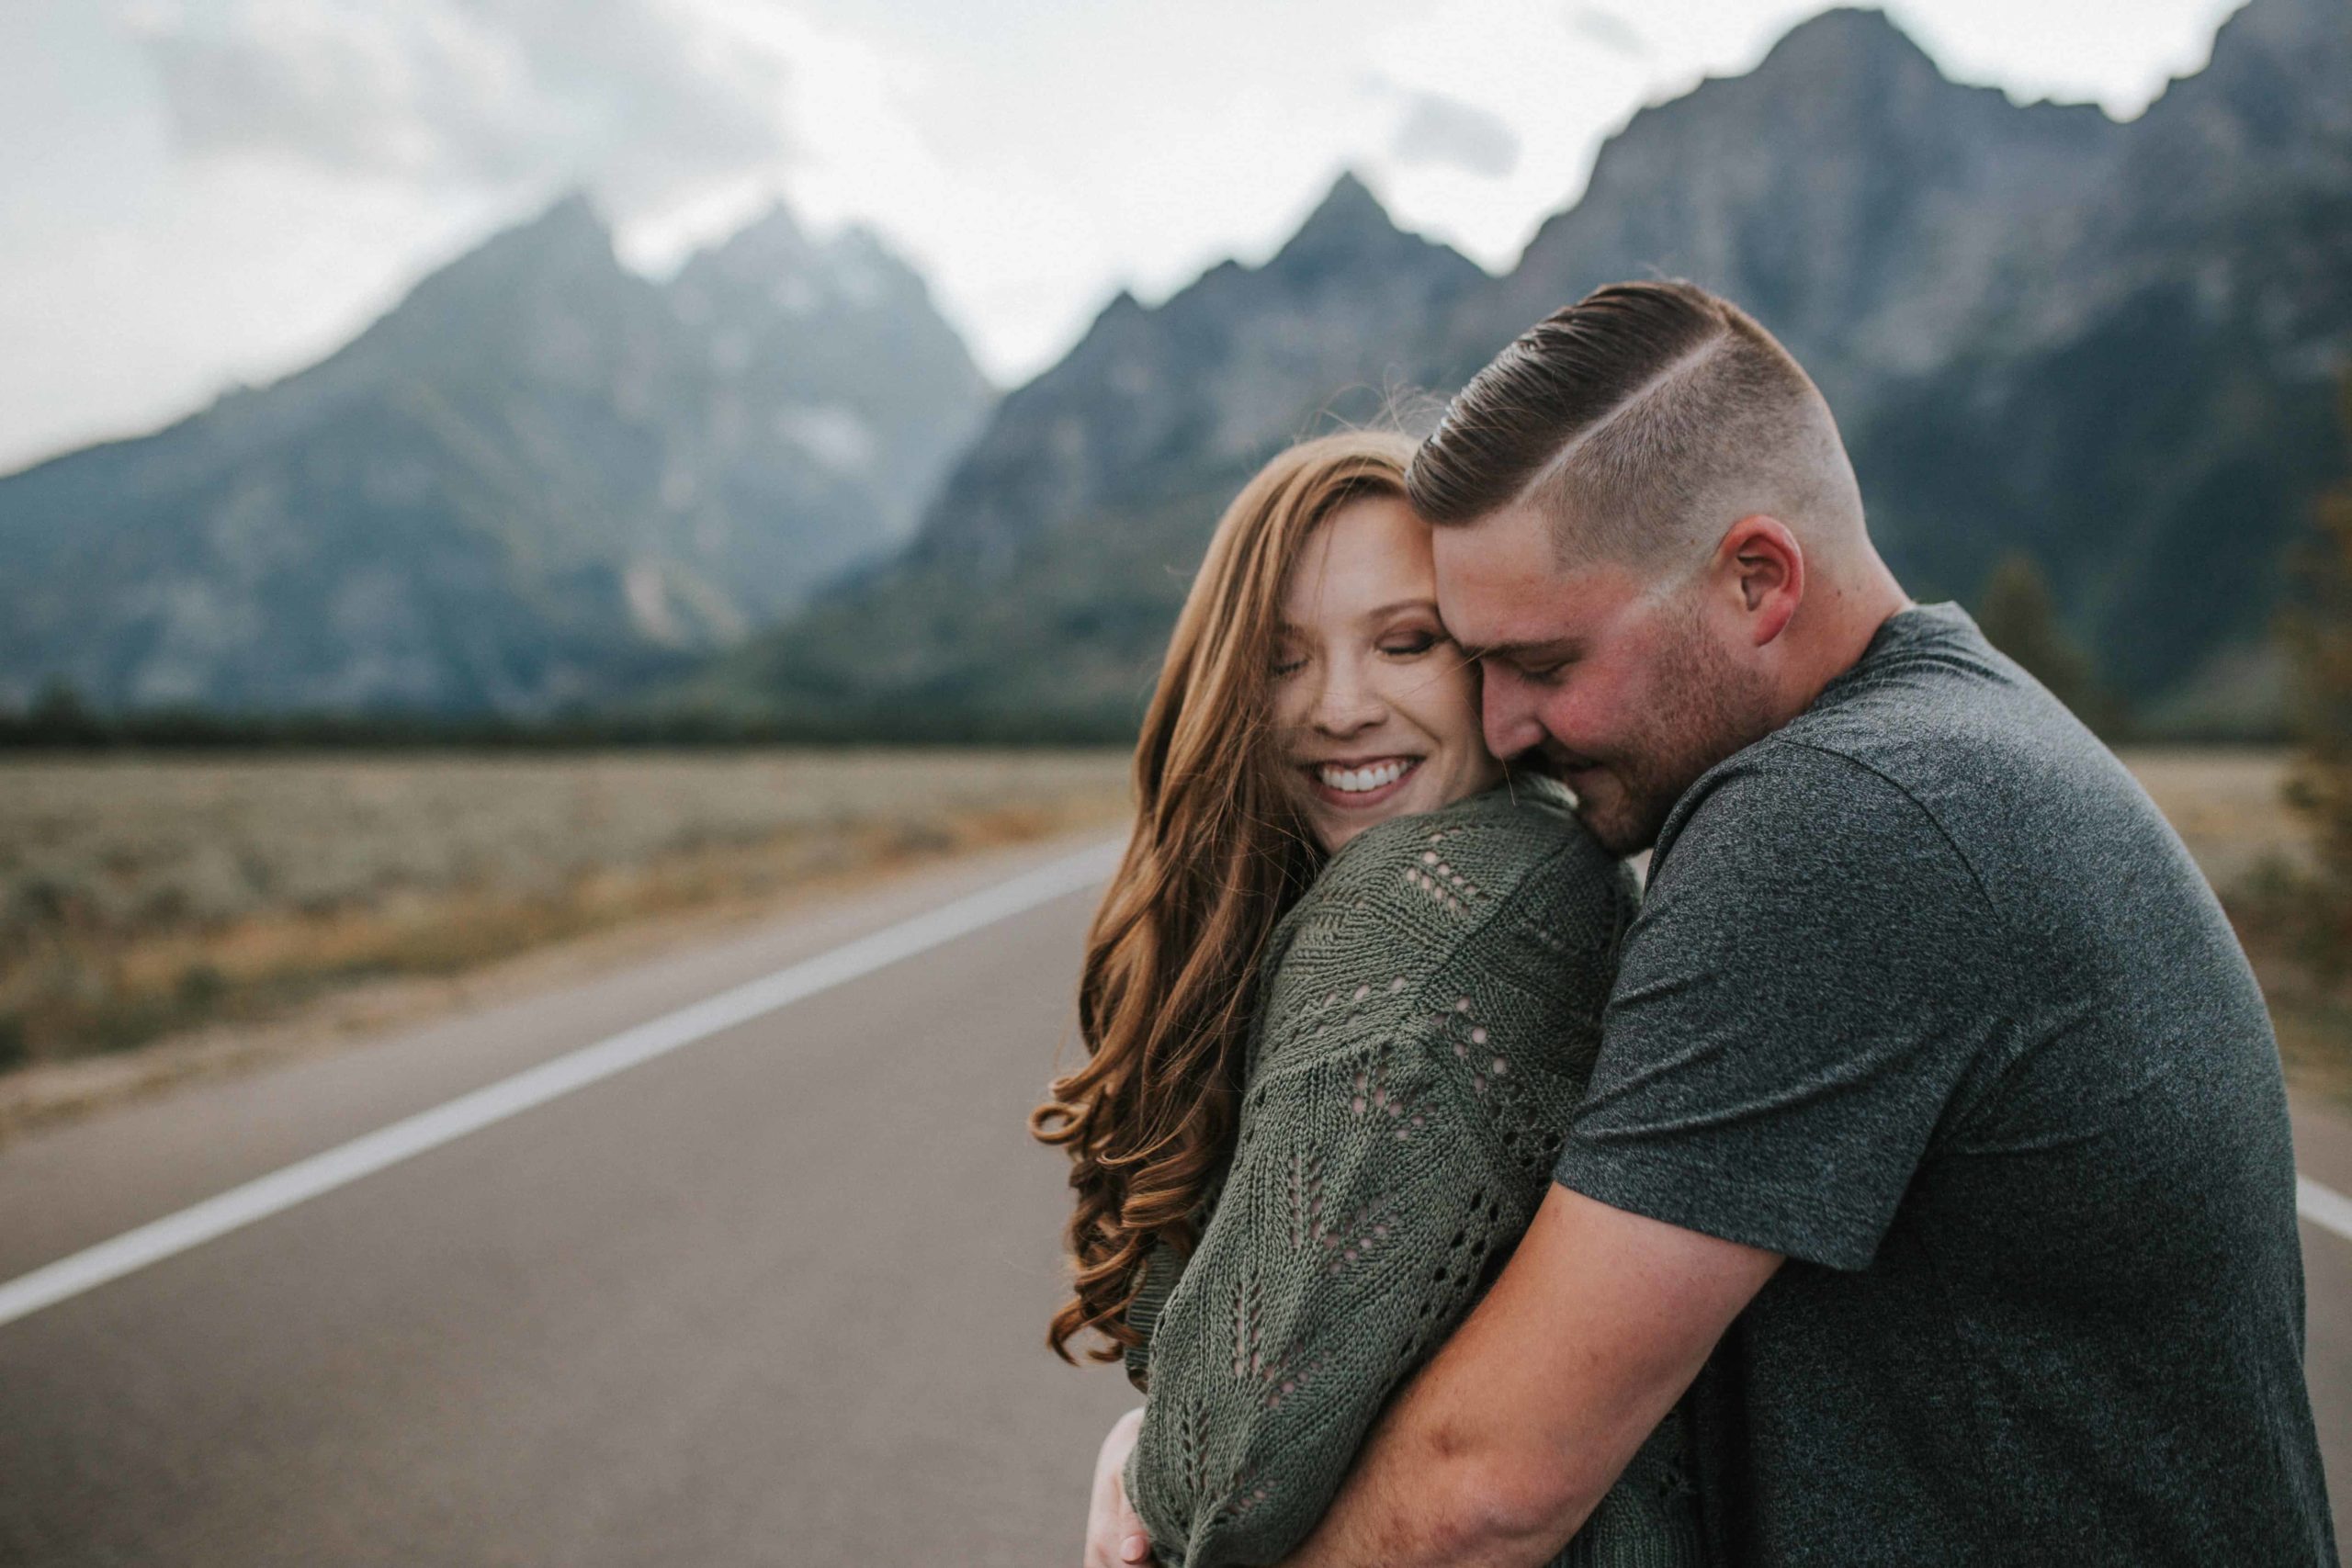 man holding his fiance in front of a mountain range while standing on an open road